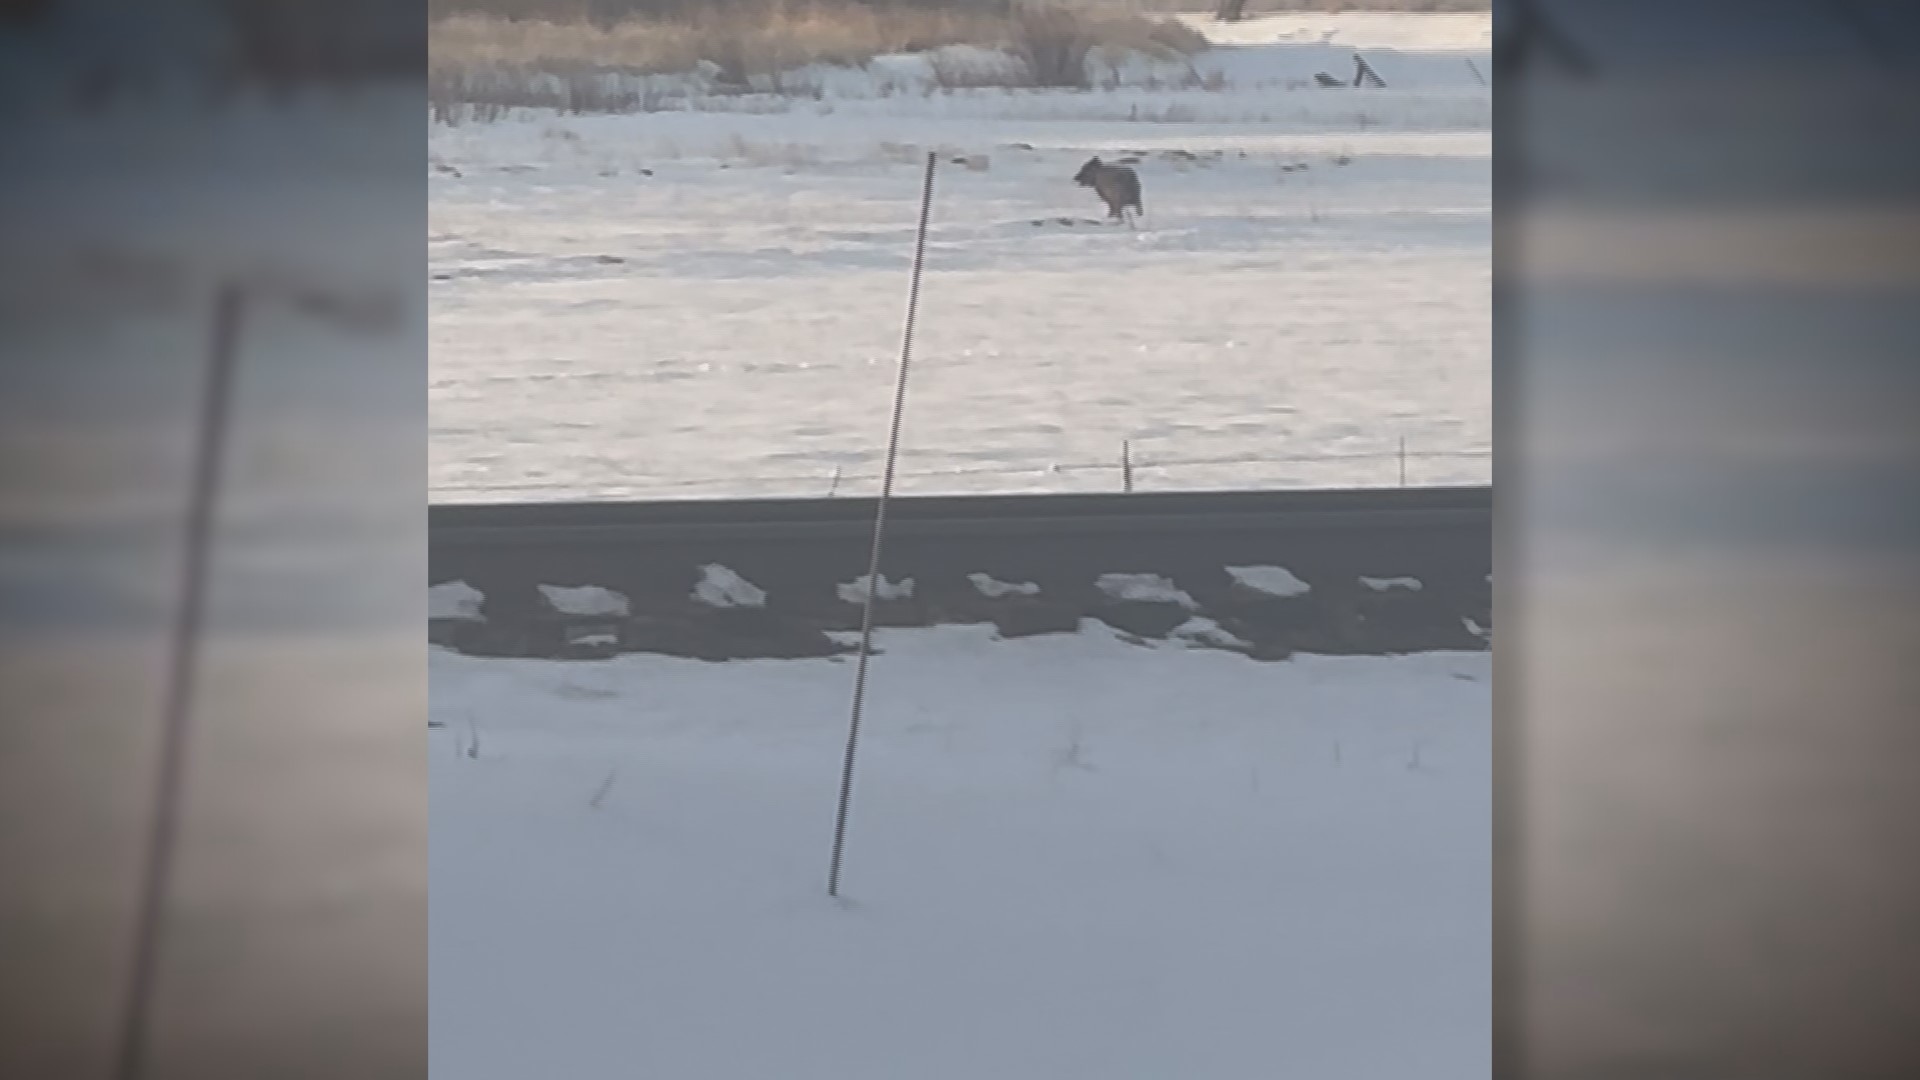 Jodi Hill, a rancher near Kremmling, captured video of a gray wolf Thursday morning. Colorado Parks and Wildlife released eight wolves into Grand County in December.